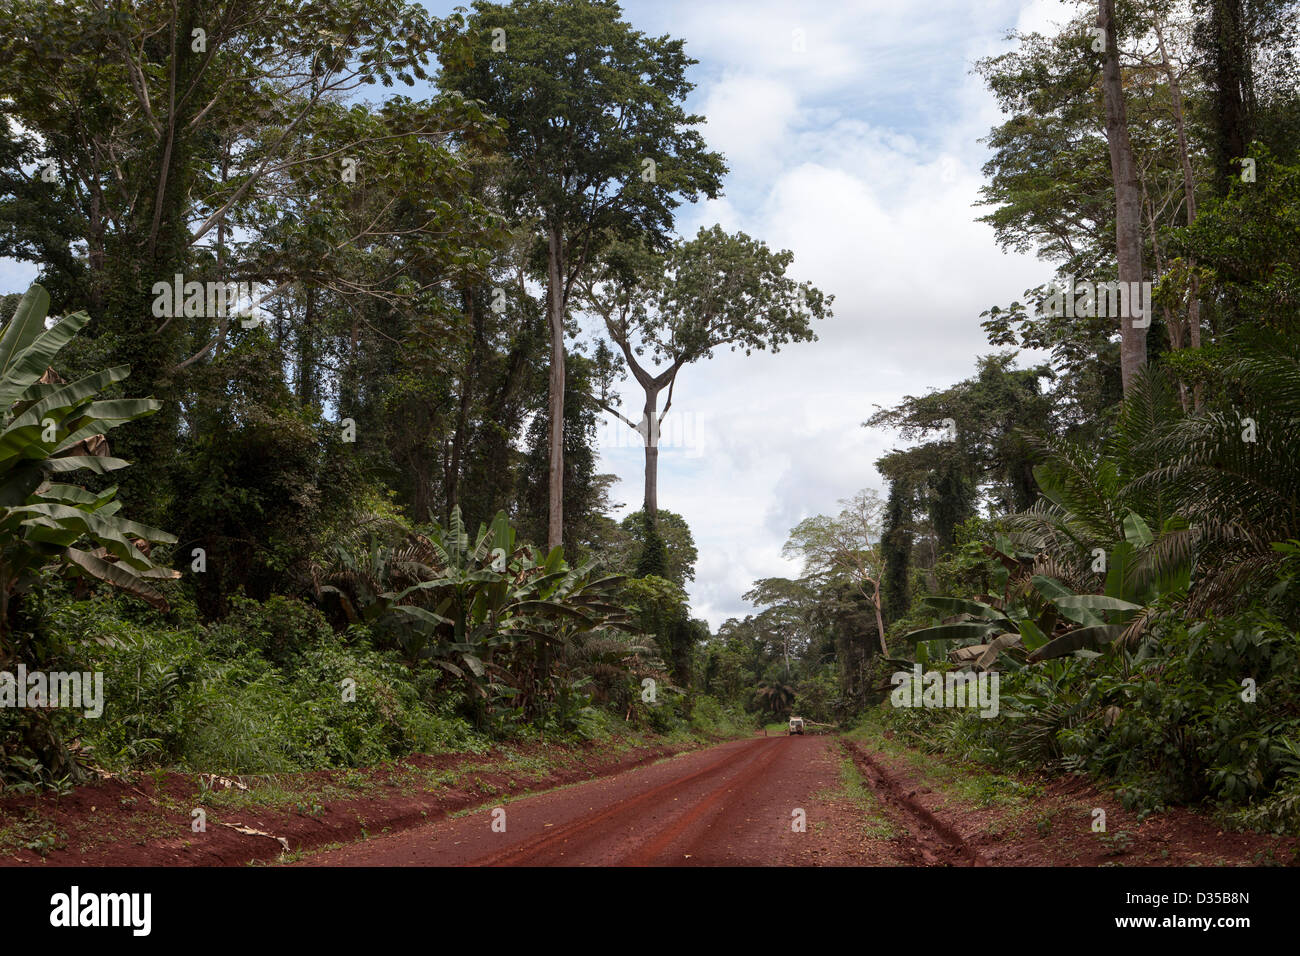 CONGO, 26th Sept 2012: A new road through the virgin rainforest on the way to Sembe. Stock Photo